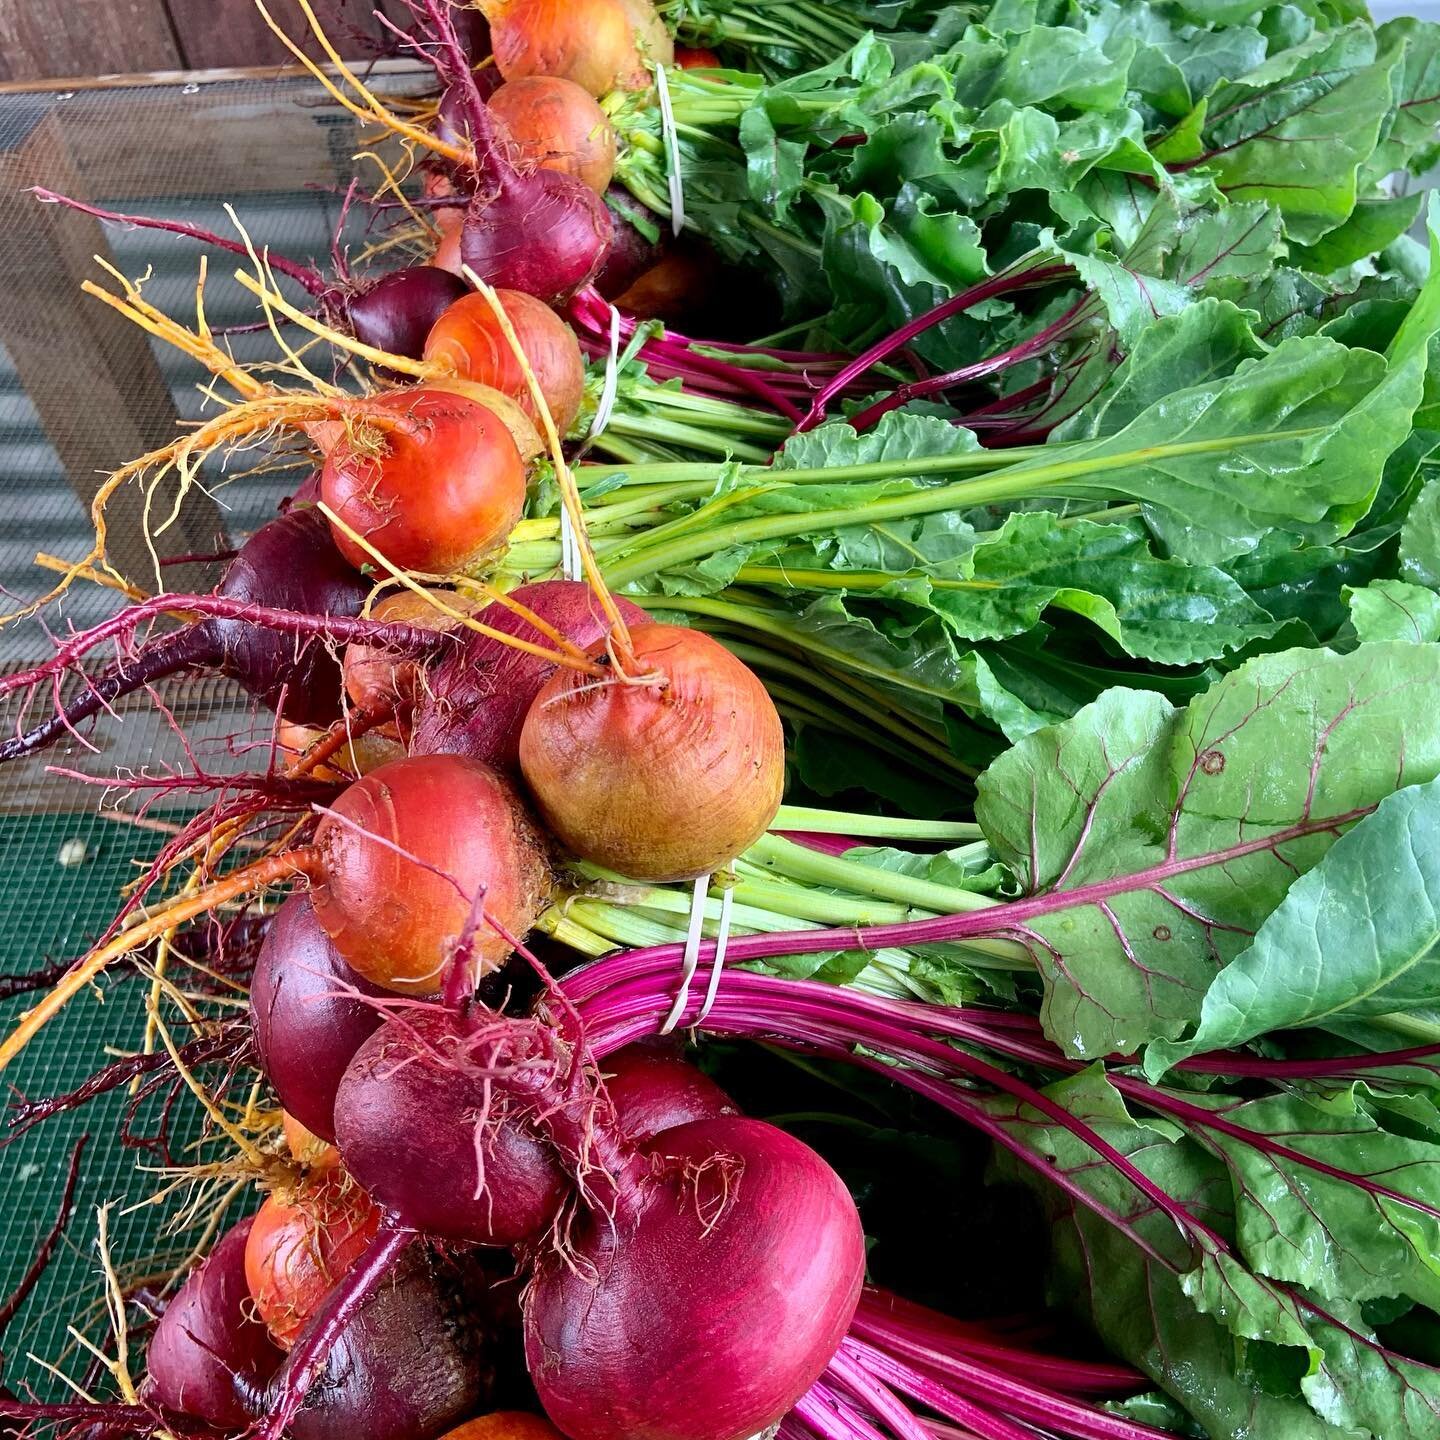 Our Saturday farm drive-thru is open tomorrow! CSA bags will be loaded with beautiful beets plus other fresh harvested produce. Side items are available including beautiful sunflowers, freshly baked naturally leavened sourdough bread by @chinitaspies